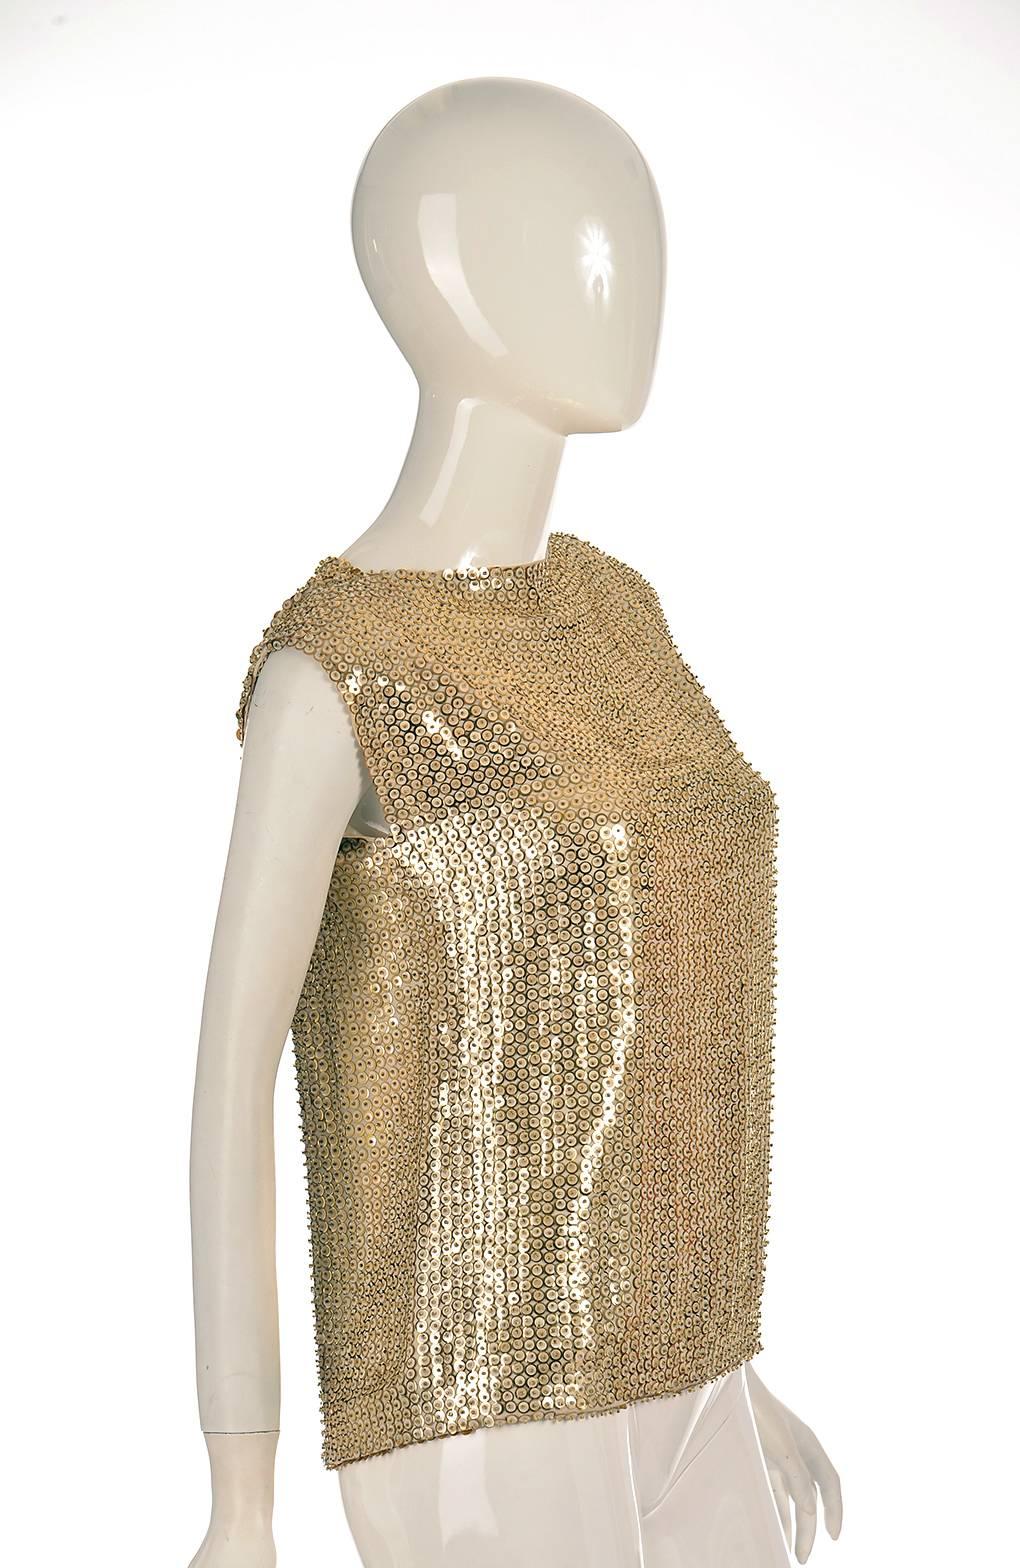 Vintage Pierre Balmain Mesh Top is gorgeous gold and white and fully sequined.  It has a white voile fabric base, supporting rows and columns of sequins. The sequins themselves are primarily white with a gold-tone border, and are topped off with